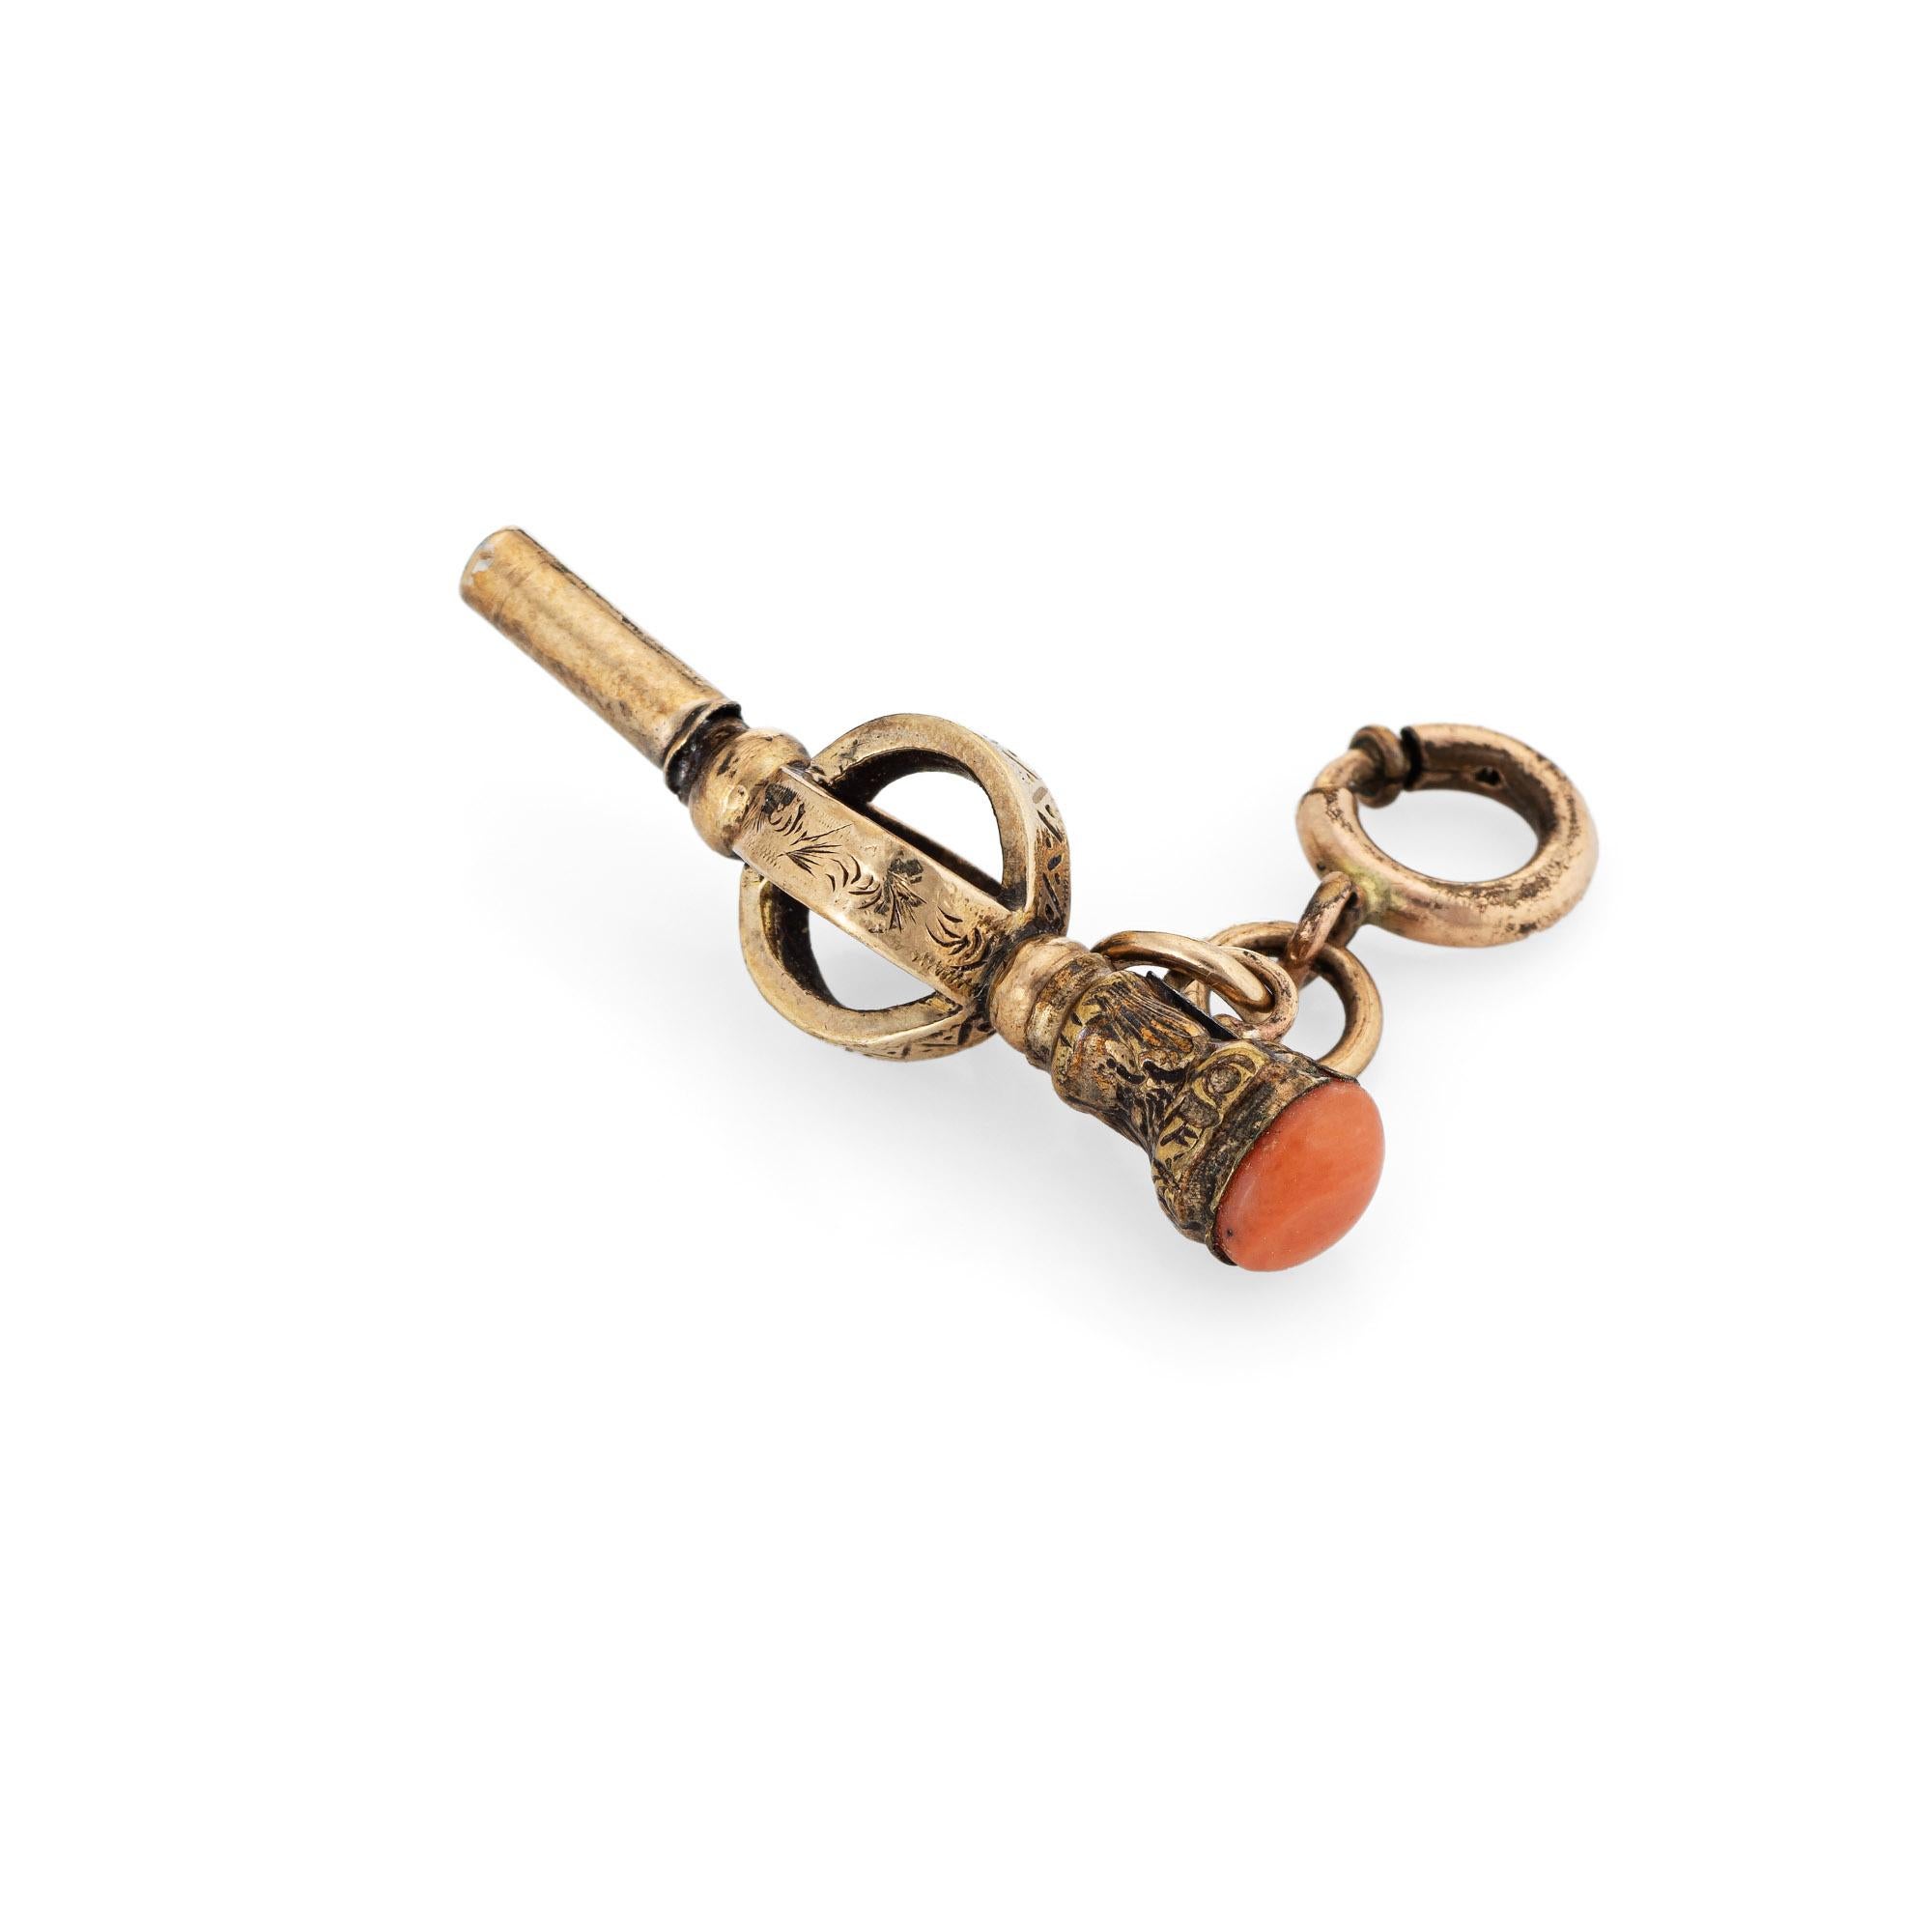 Finely detailed antique Victorian watch key fob crafted in 9k yellow gold.  

Natural coral measures 5mm (in good condition and free of cracks or chips). 

The decorative watch fob features ornate etched foliate detail. With a chain link available